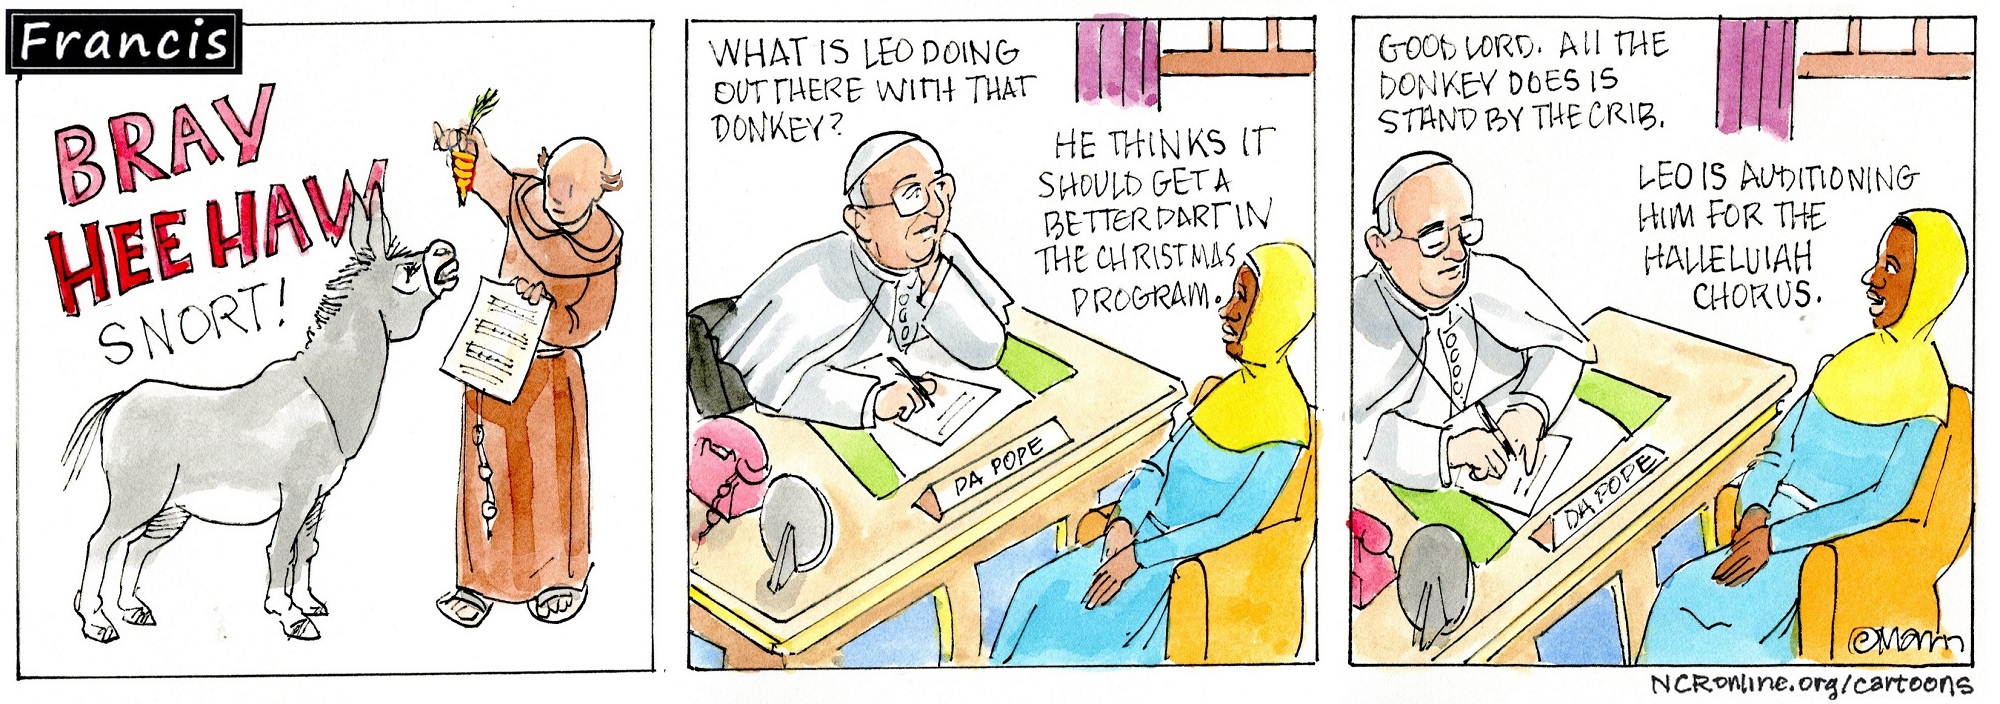 1st panel: Brother Leo holds up a carrot and a sheet of music to a donkey, which is saying, "BRAY HEE HAW SNORT!"  2nd and 3rd panels:  Pope Francis sits at a desk with a sign that says, "DA POPE." Gabby sits opposite him and they talk.  Francis: What is Leo doing out there with that donkey? Gabby: He thinks it should get a better part in the Christmas program. Francis: Good Lord. All the donkey does is stand by the crib. Gabby: Leo is auditioning him for the Hallelujah Chorus.